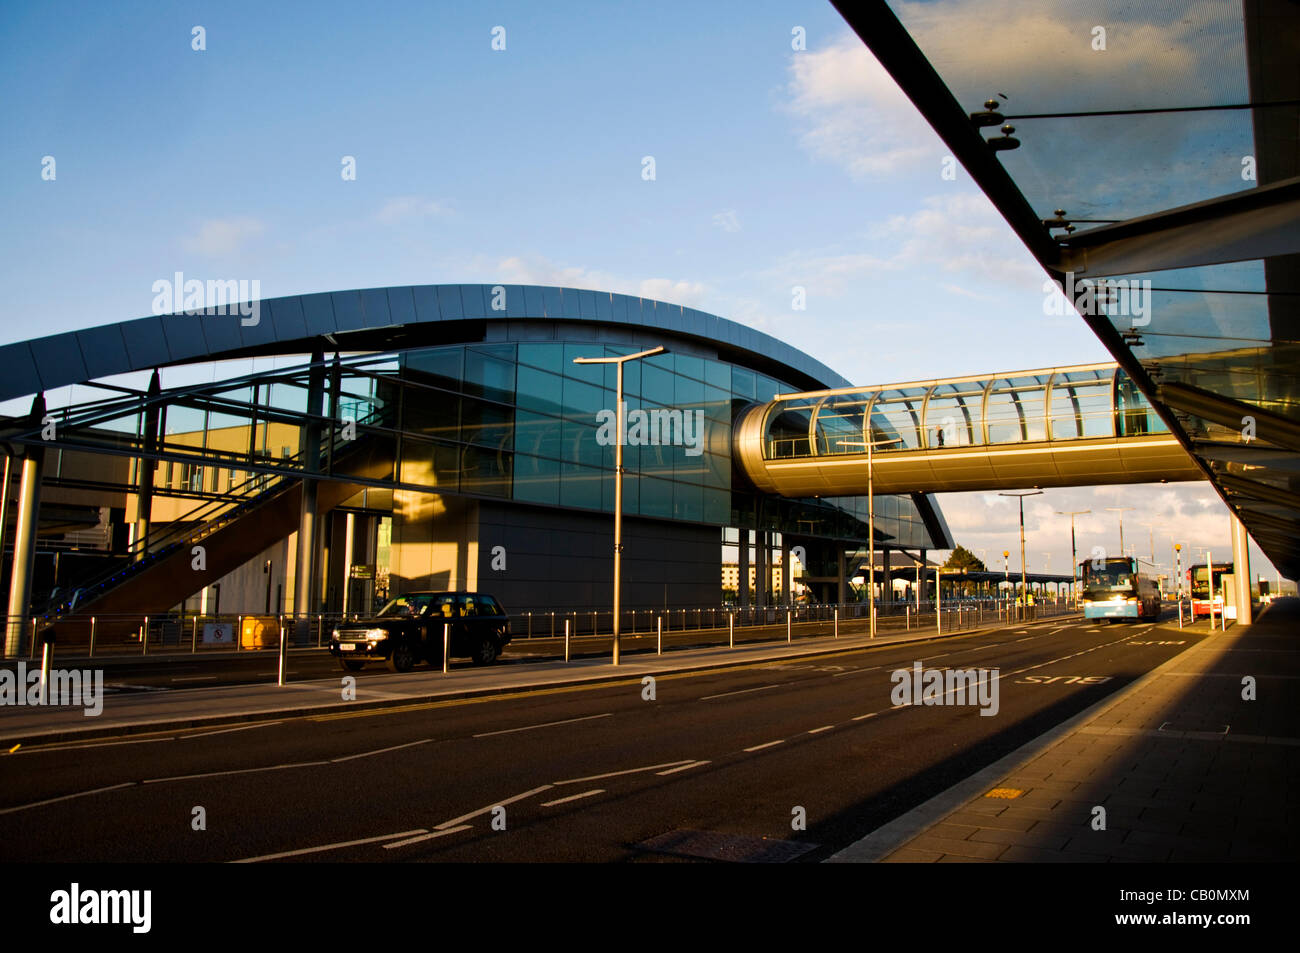 15th May 2012. Dublin Airport Terminal 2, Ireland. It was revealed today that the International airport failed an EU security audit on two counts. The new terminal,pictured, is a showcase for Ireland's image abroad. Photo by: Richard Wayman/Alamy Stock Photo